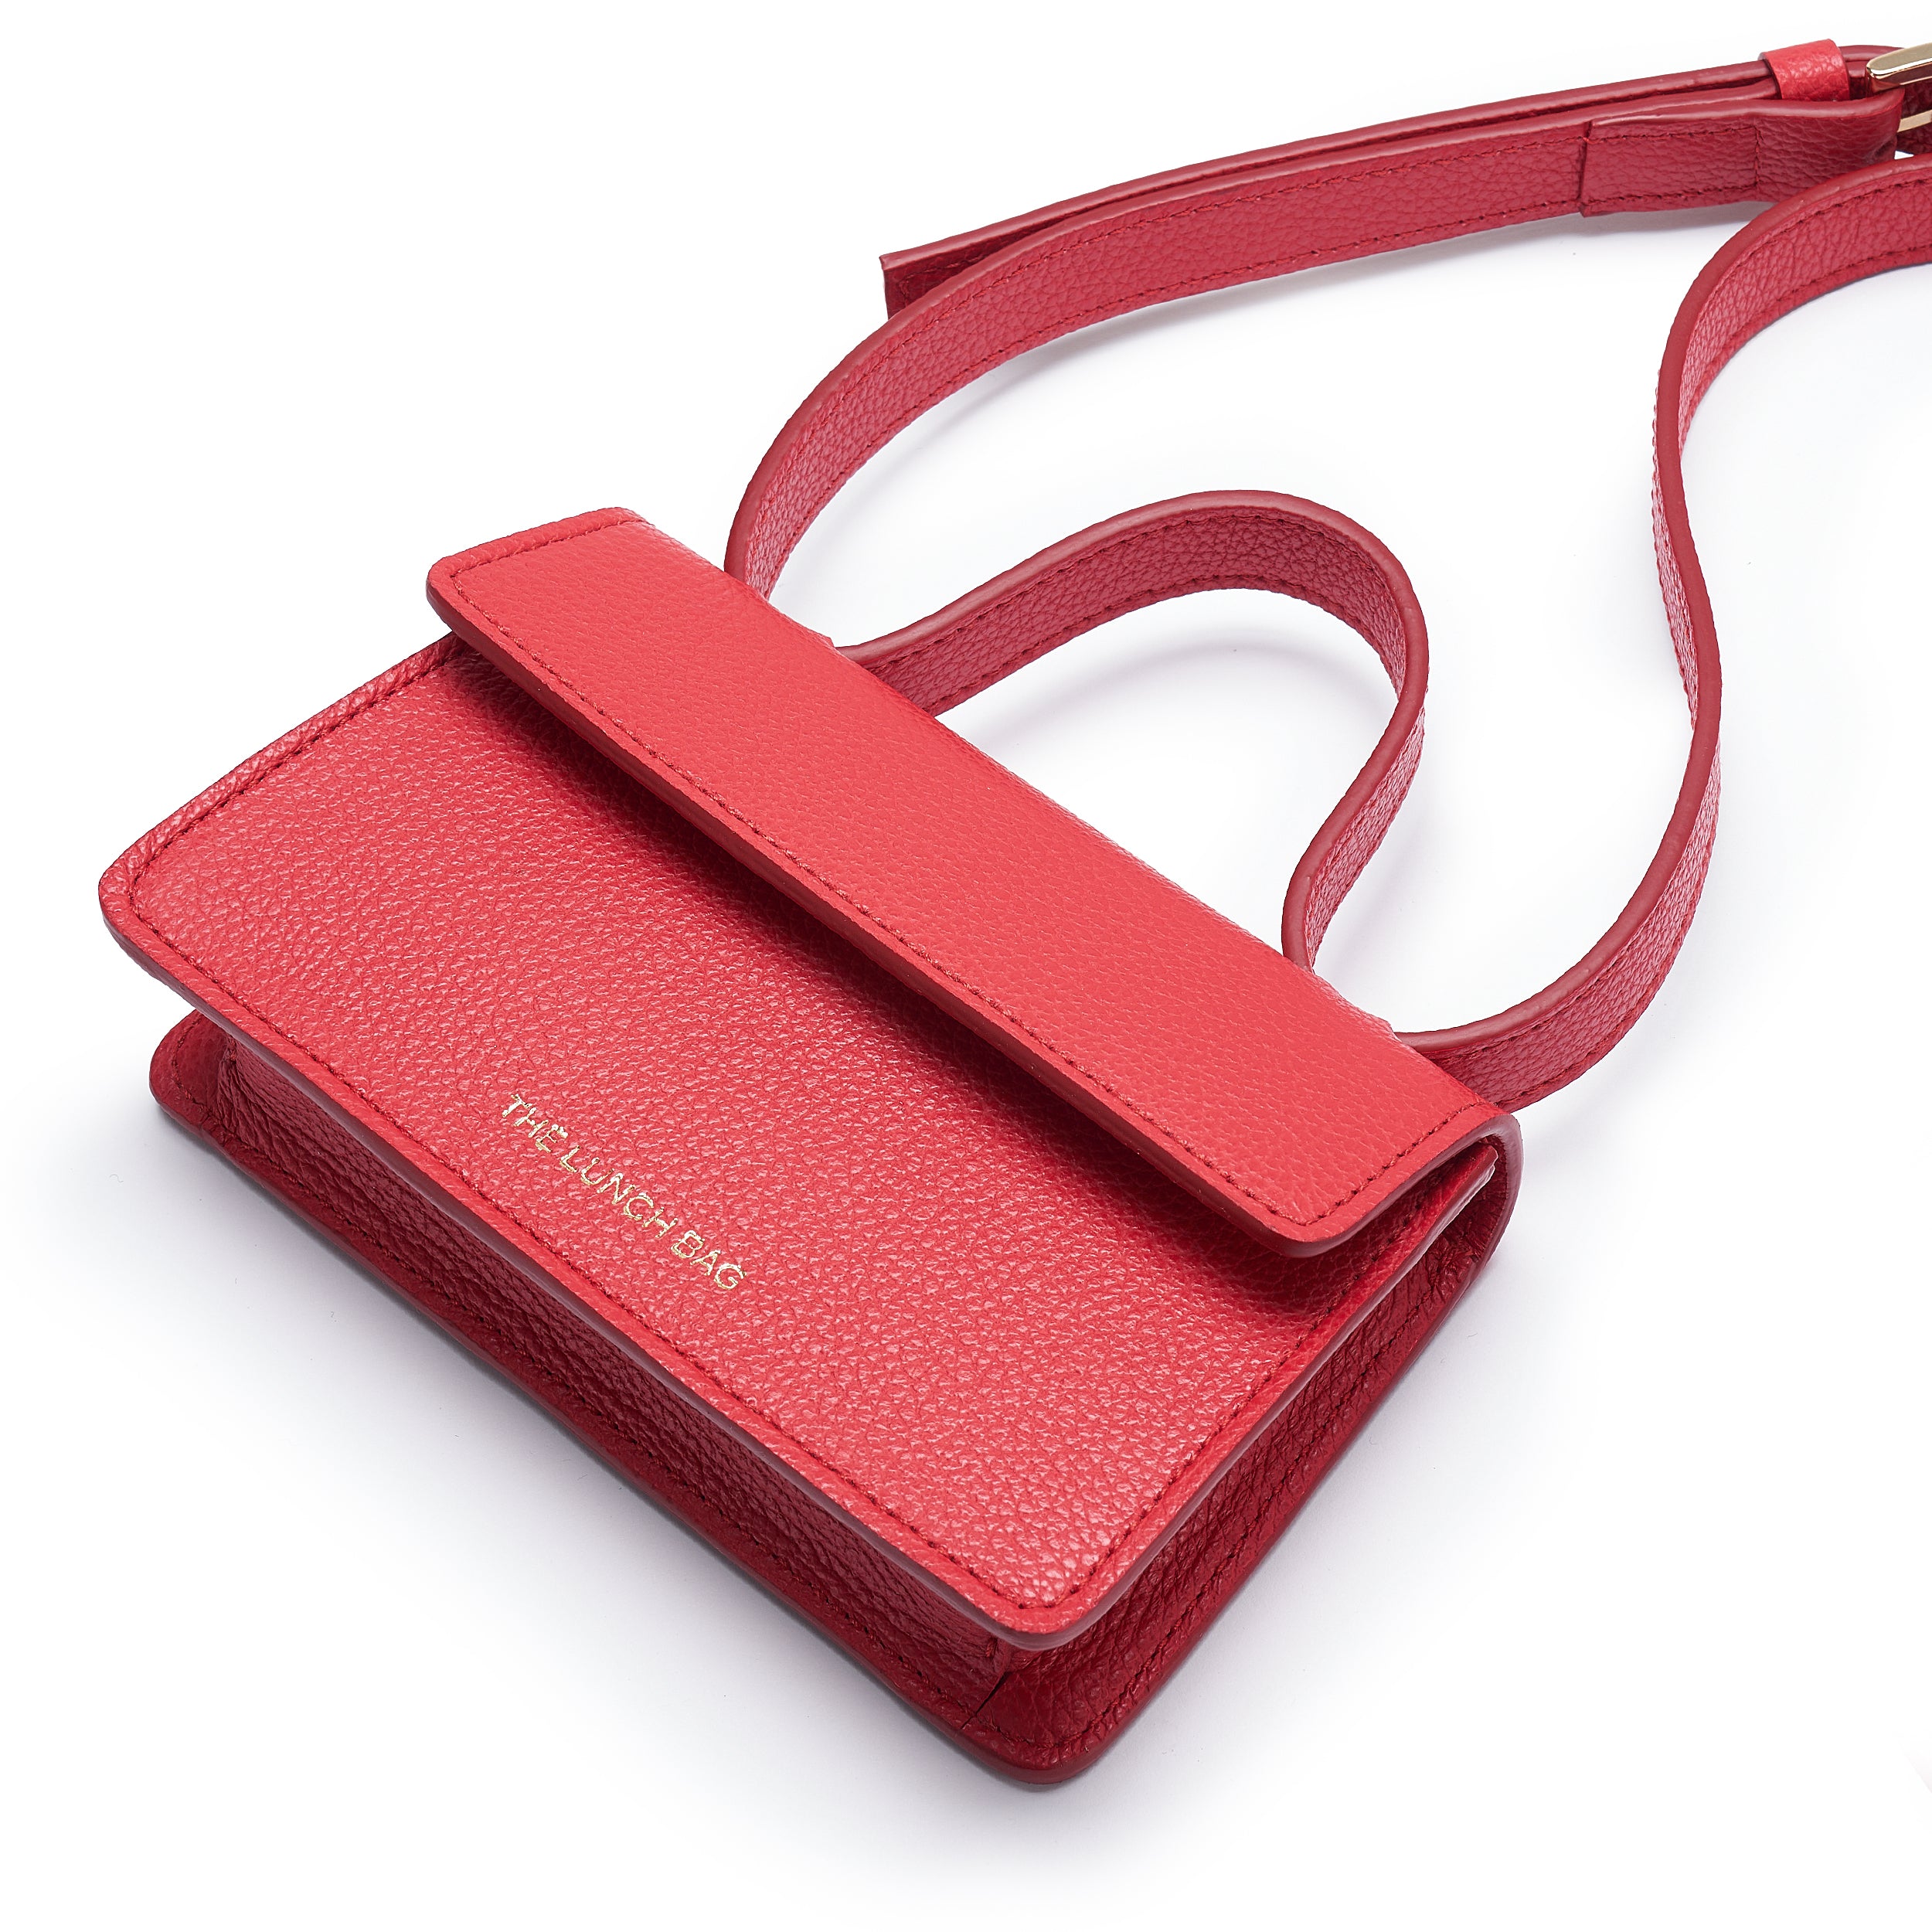 Mini lunch bag red